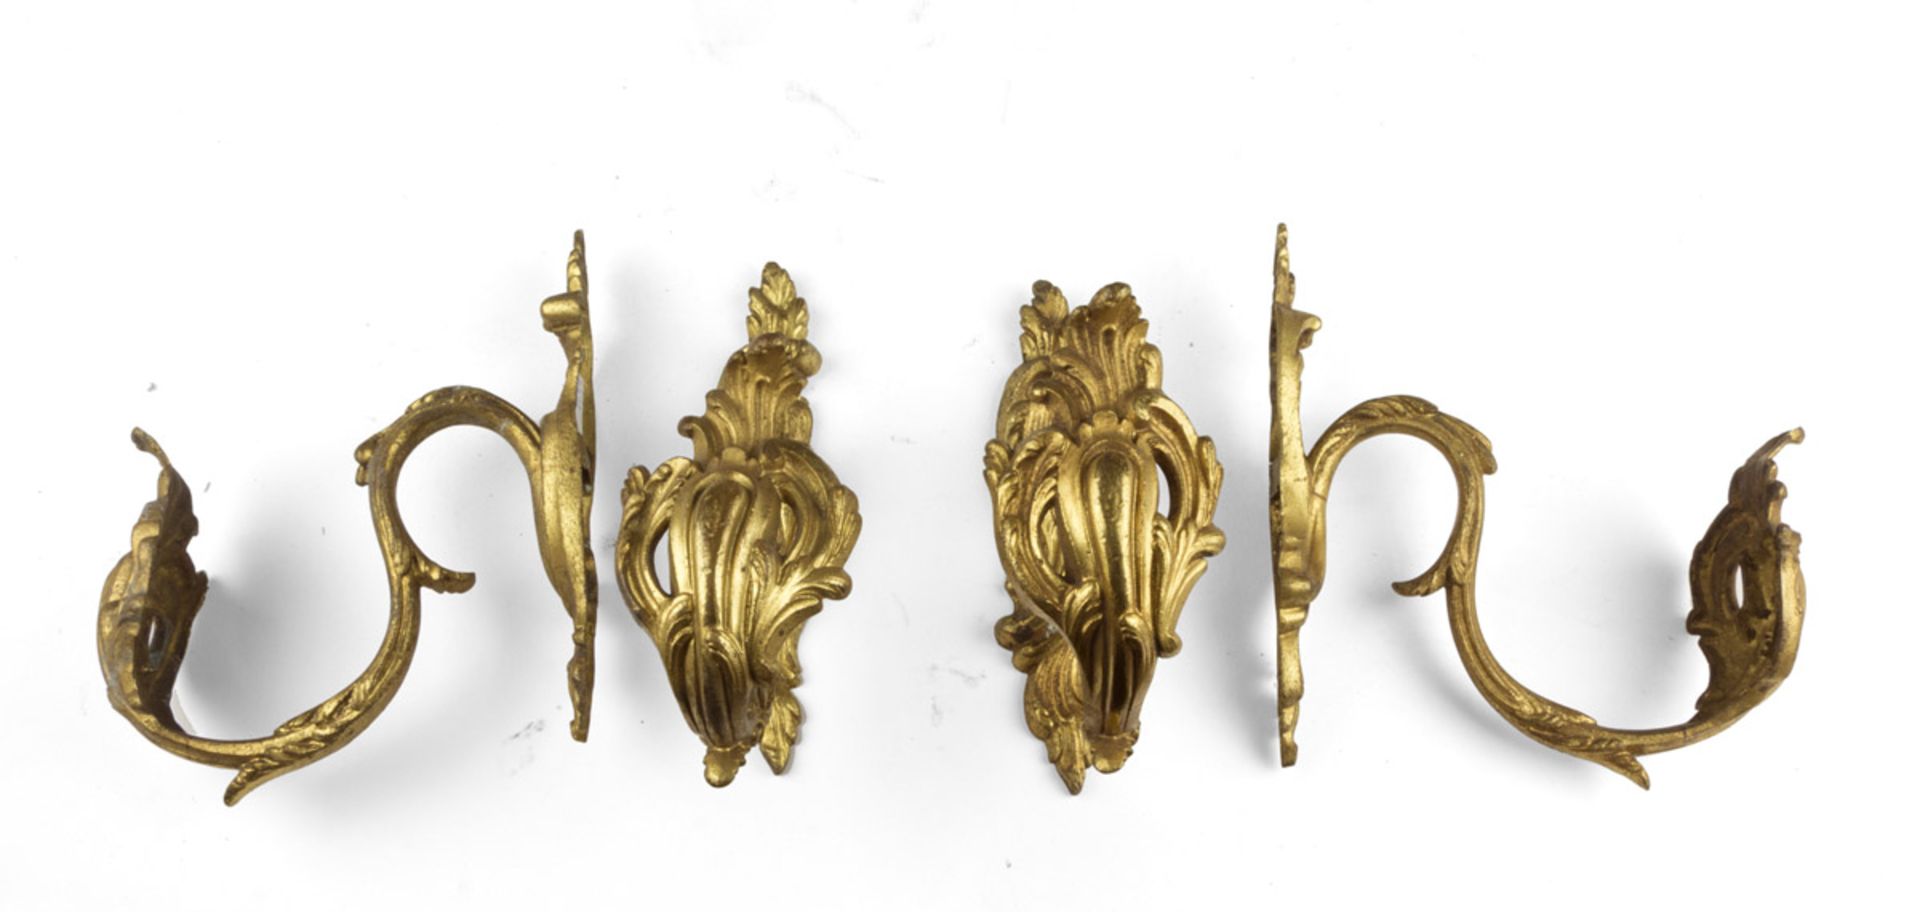 TWO PAIRS OF RODS, 19TH CENTURY in ormolu, with leaves endings. Measures cm. 20 x 7 x 17. DUE COPPIE